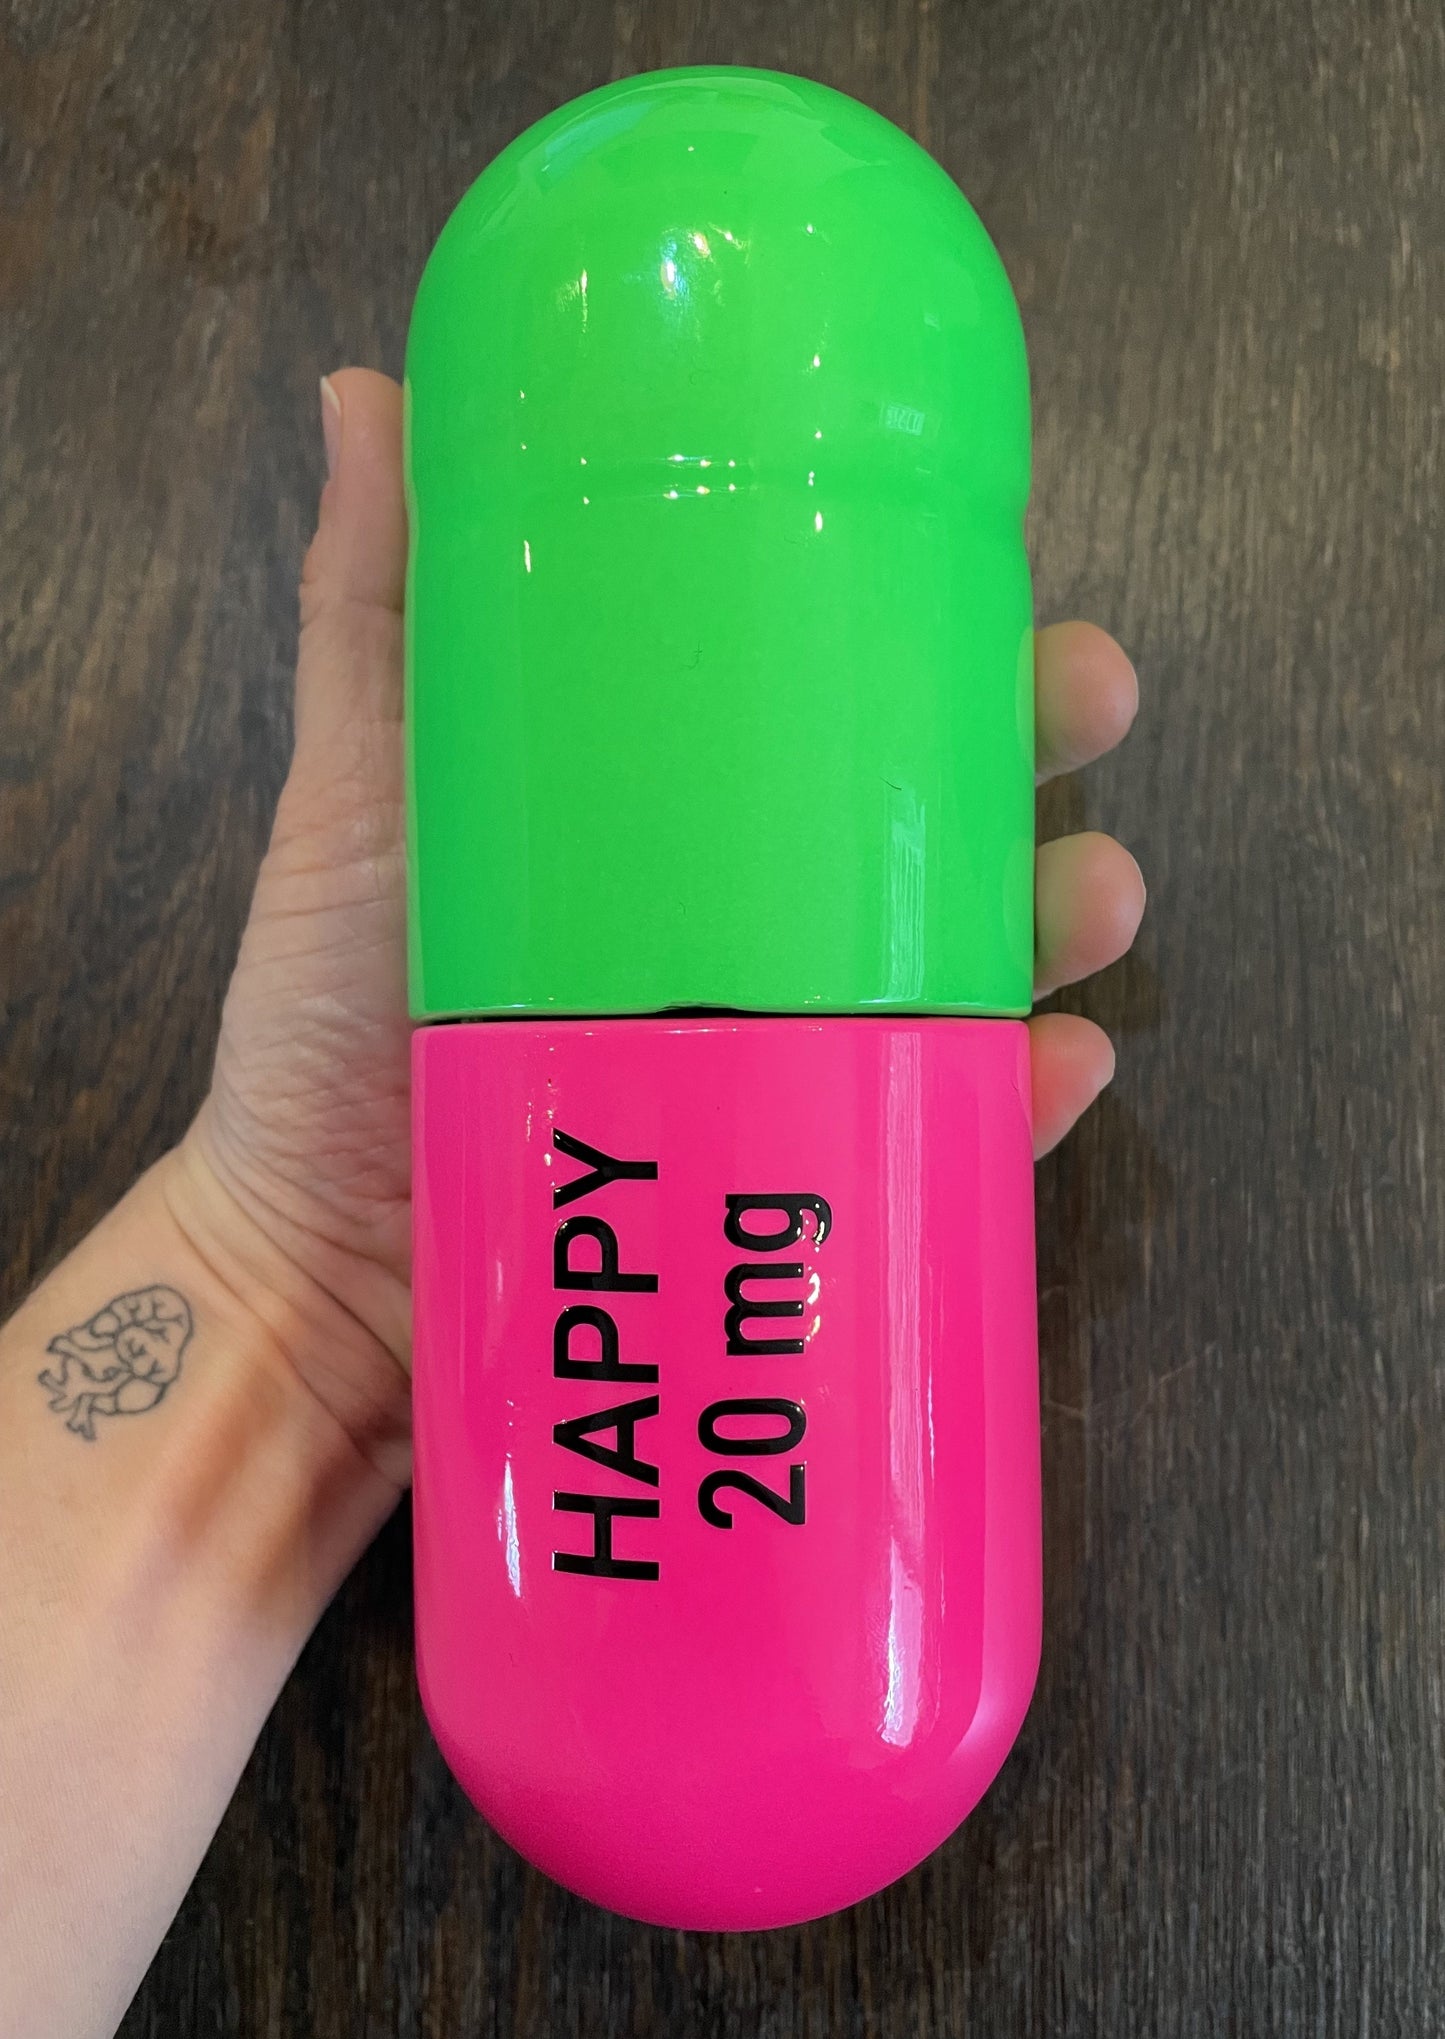 Ceramic Happy Pill - Fluorescent Green and Pink